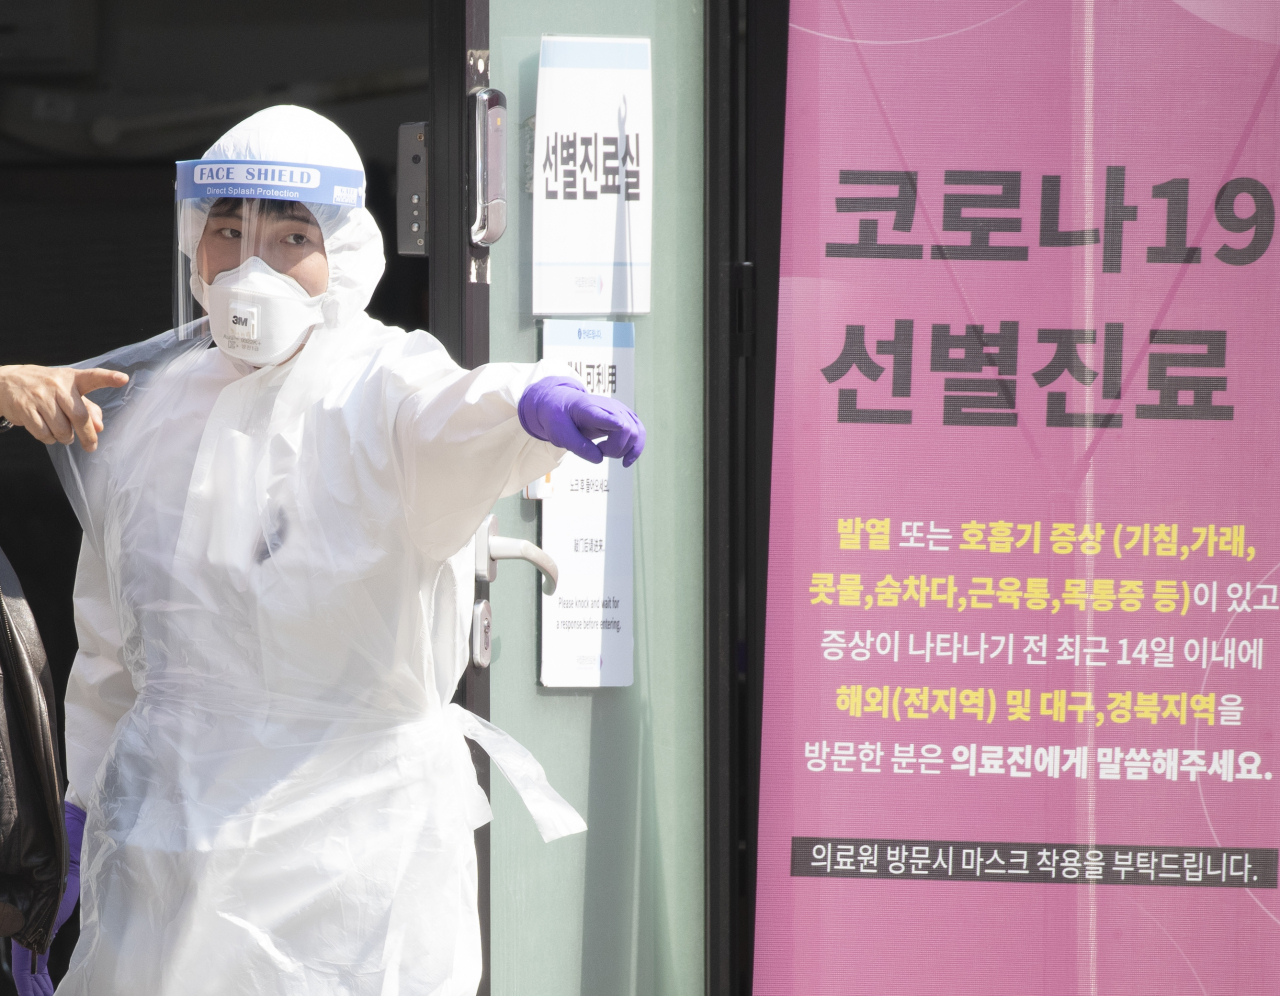 A health worker is on duty at a virus screening center at the National Medical Center in central Seoul on Tuesday. (Yonhap)